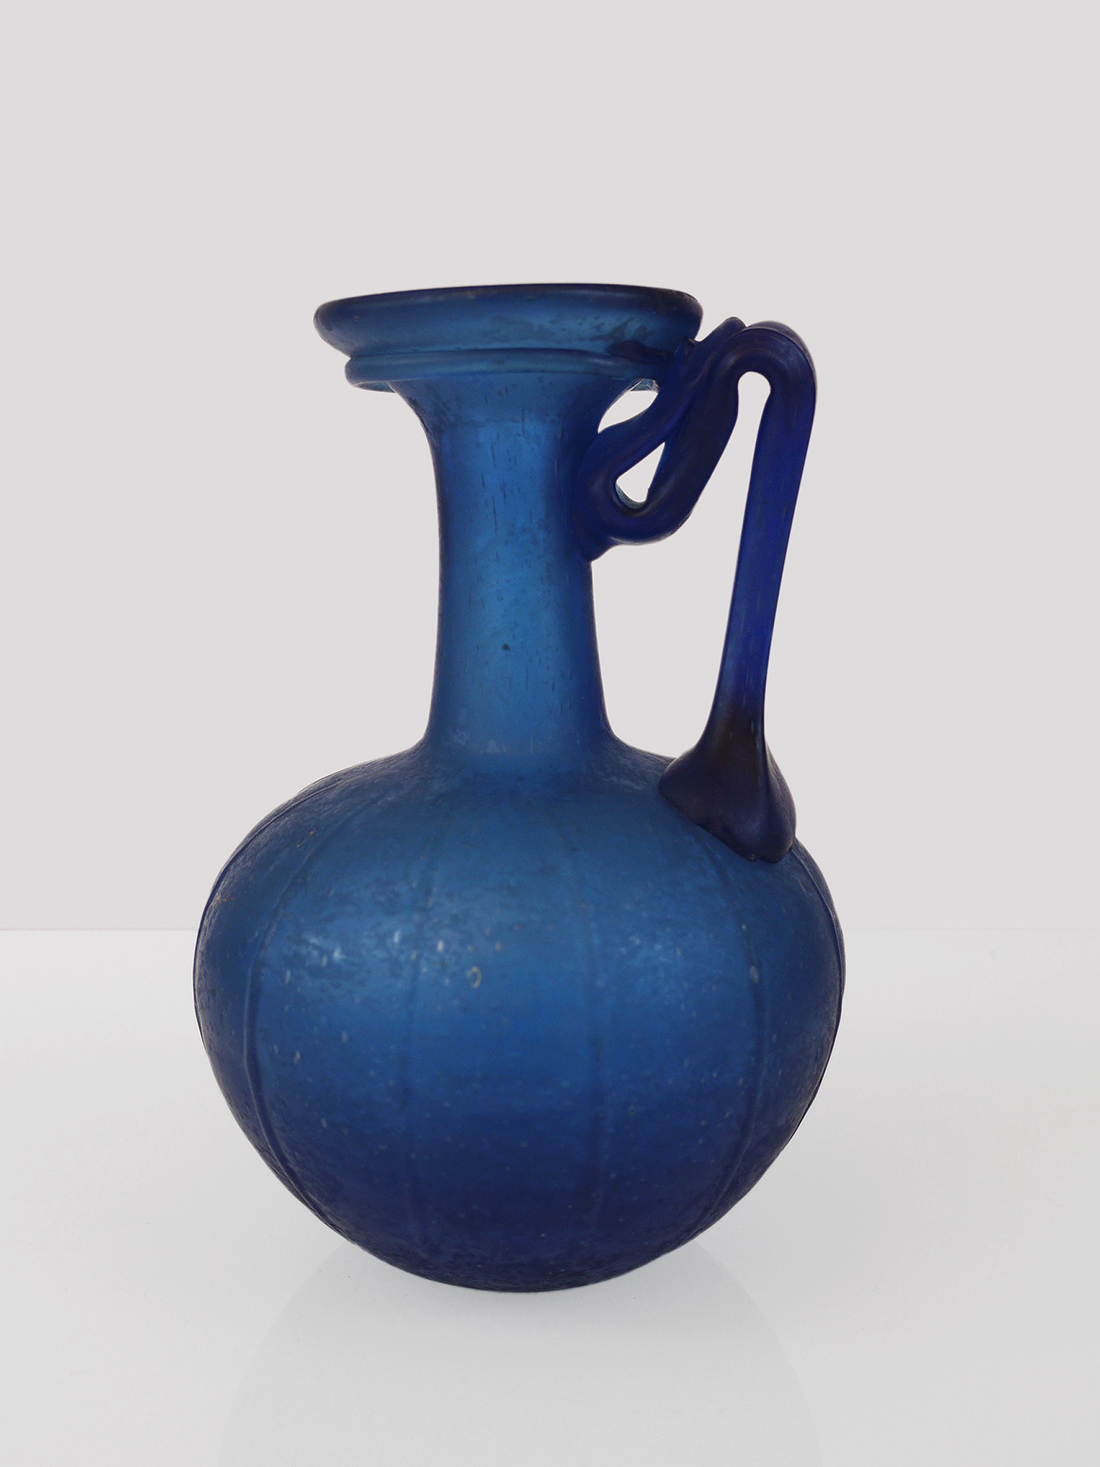 Roman Glass VASE Reproduction Roman-Germanic Museum by CCAA GLASGALERIE ...